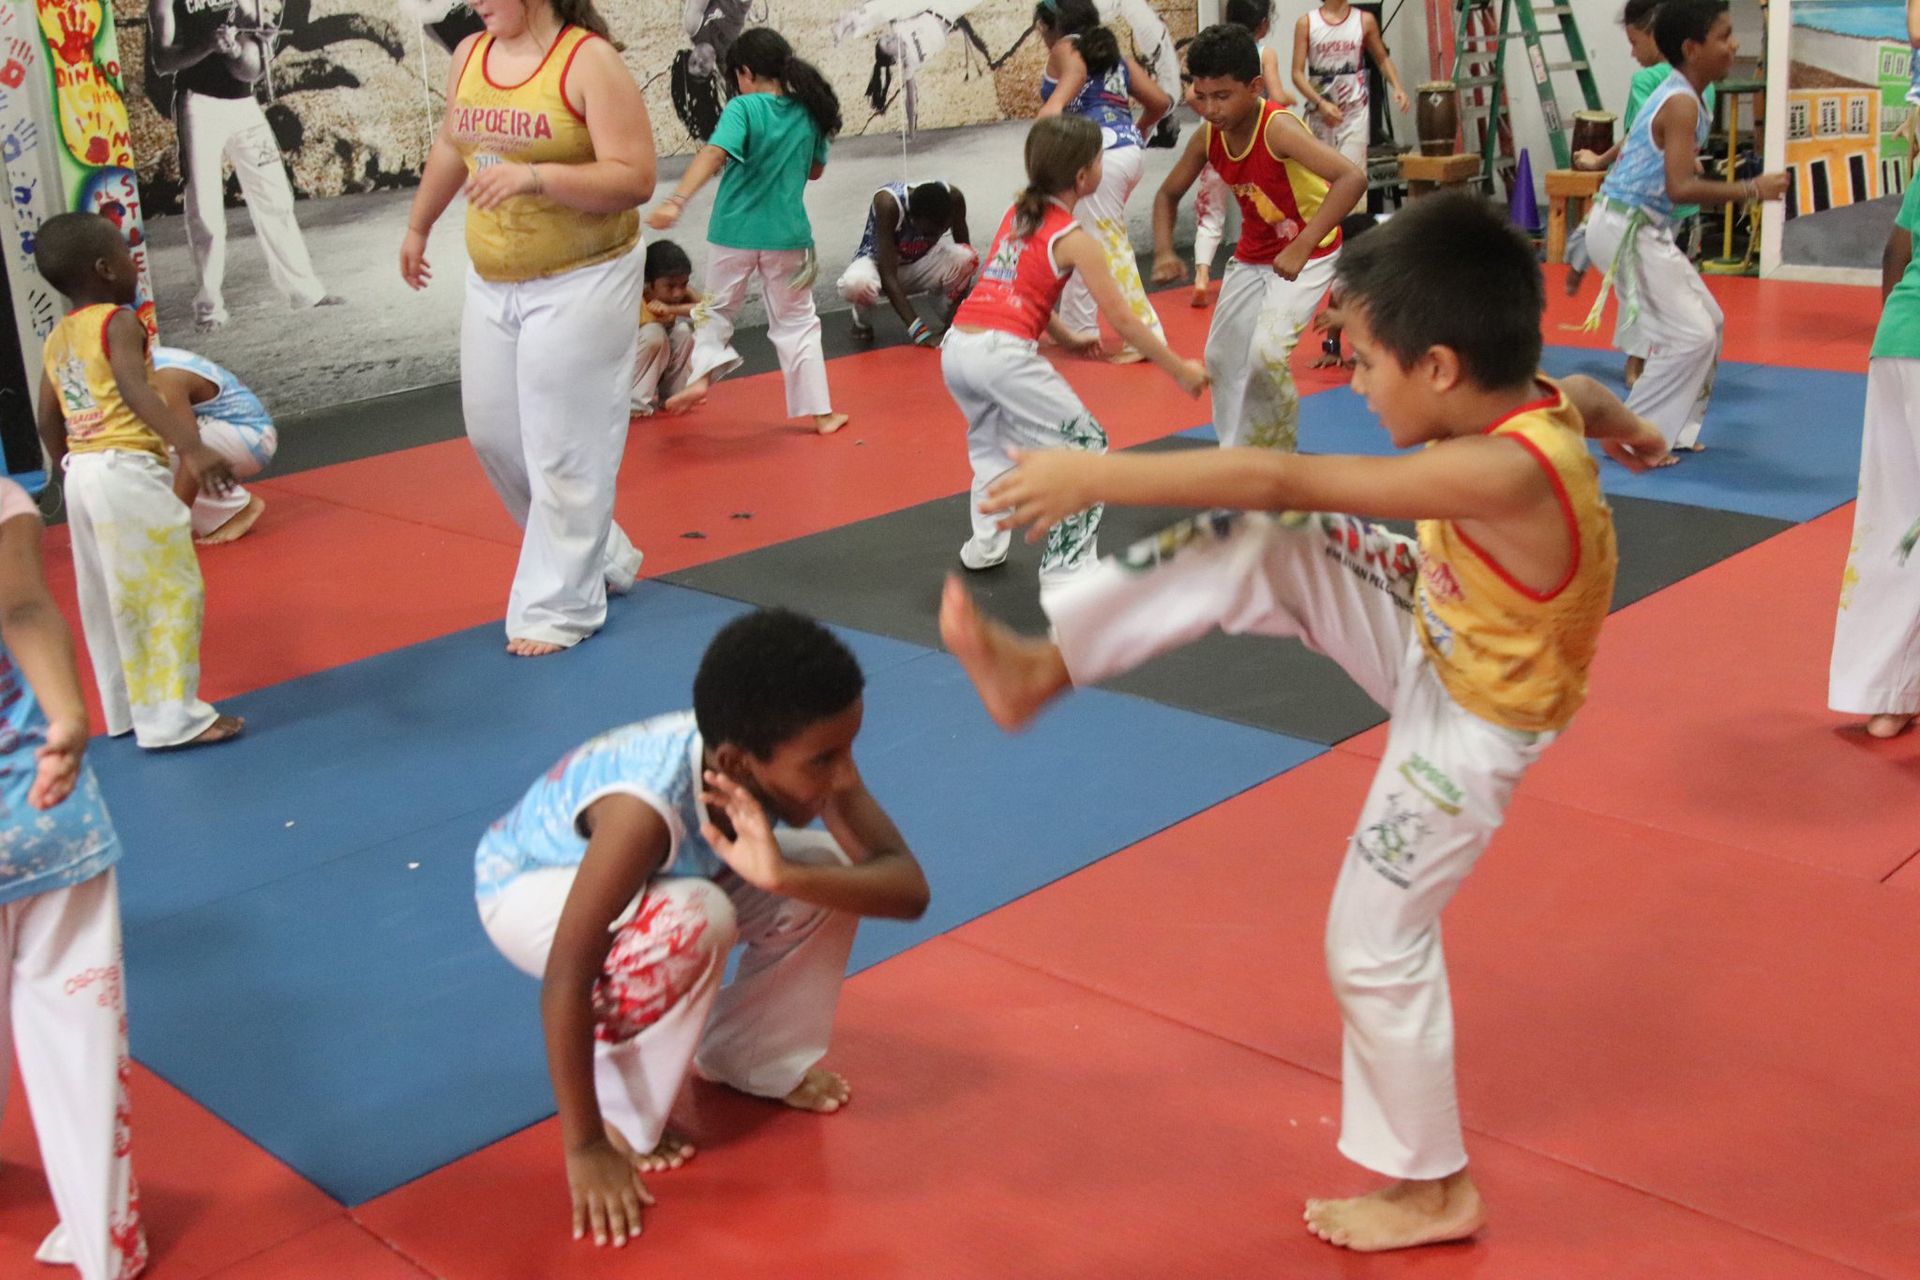 a boy and a girl are practicing taekwondo together .